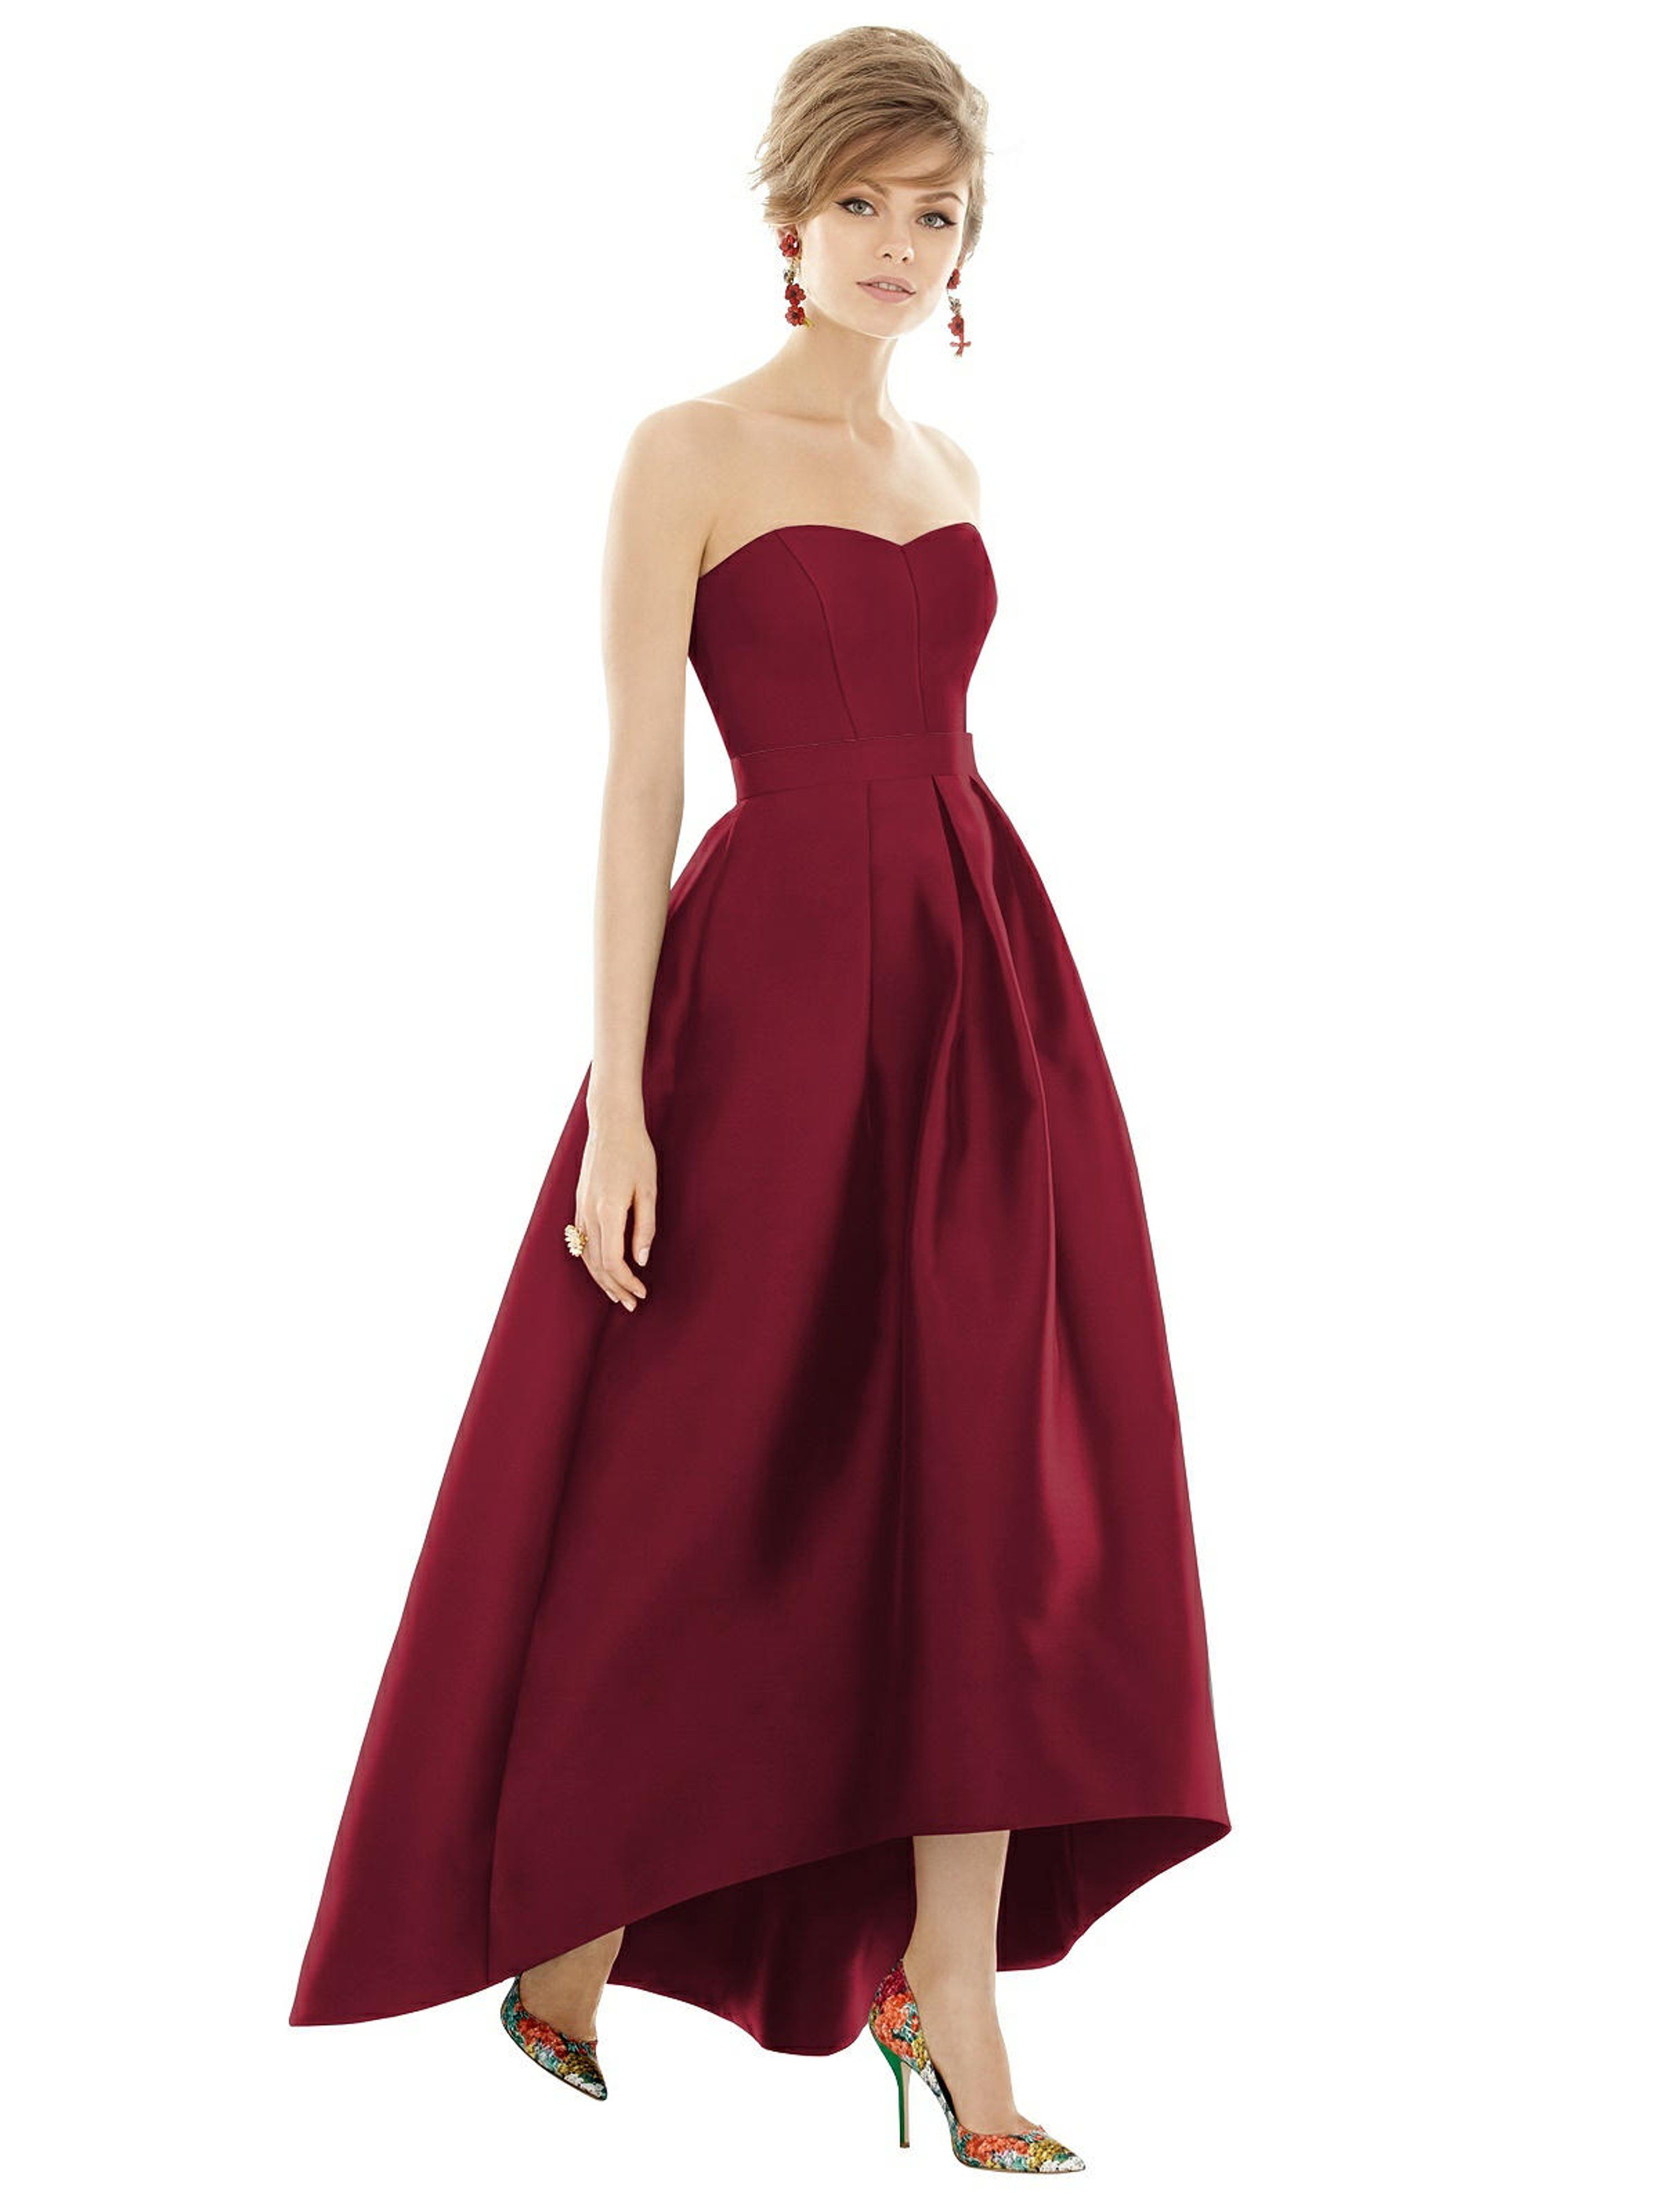 Strapless Satin High Low Dress With Pockets - 2 - Also in: 12, 4, 0, 16, 14, 18W, 10, 8 | Verishop